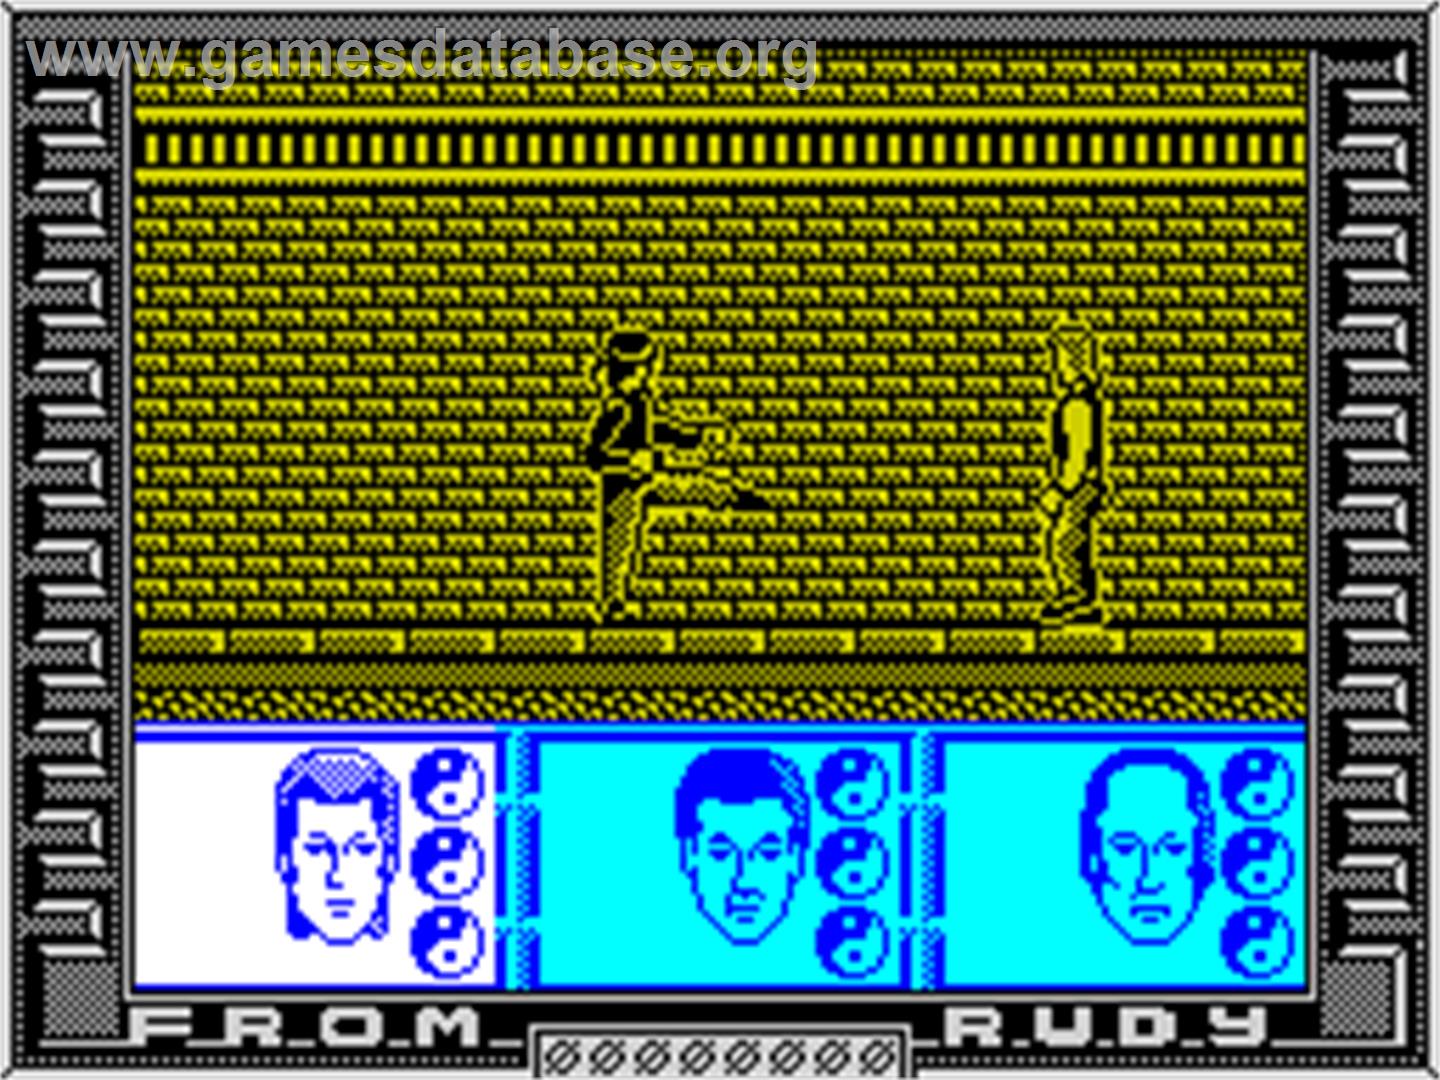 Big Trouble in Little China - Sinclair ZX Spectrum - Artwork - In Game